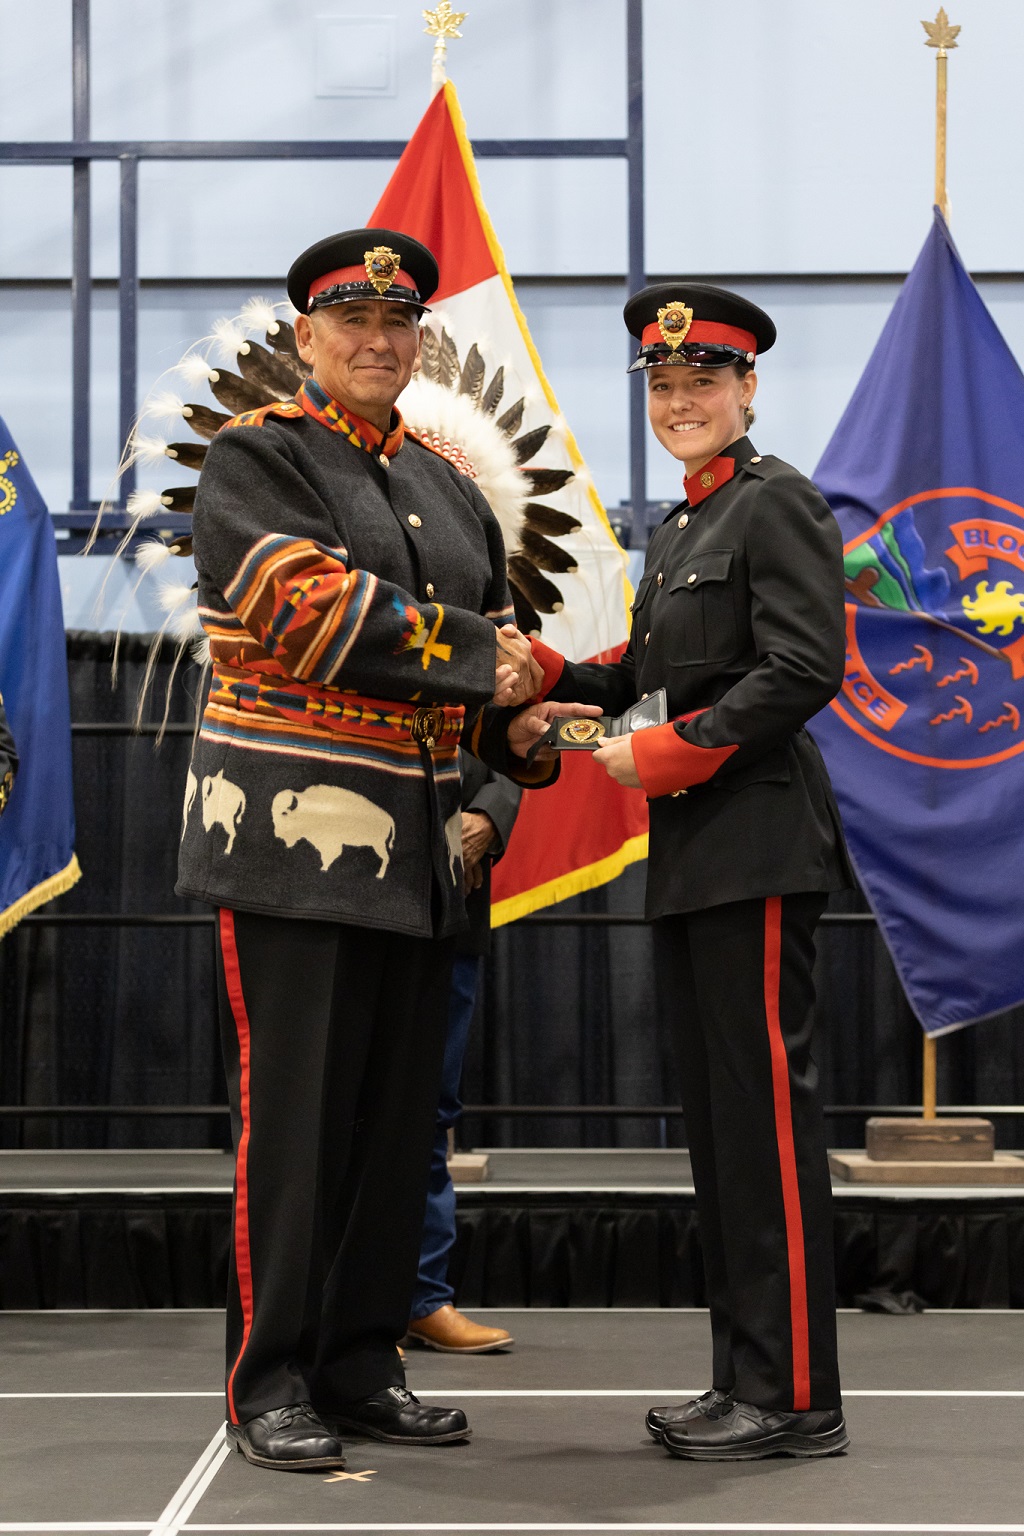 A police chief shakes hands with a police cadet graduate